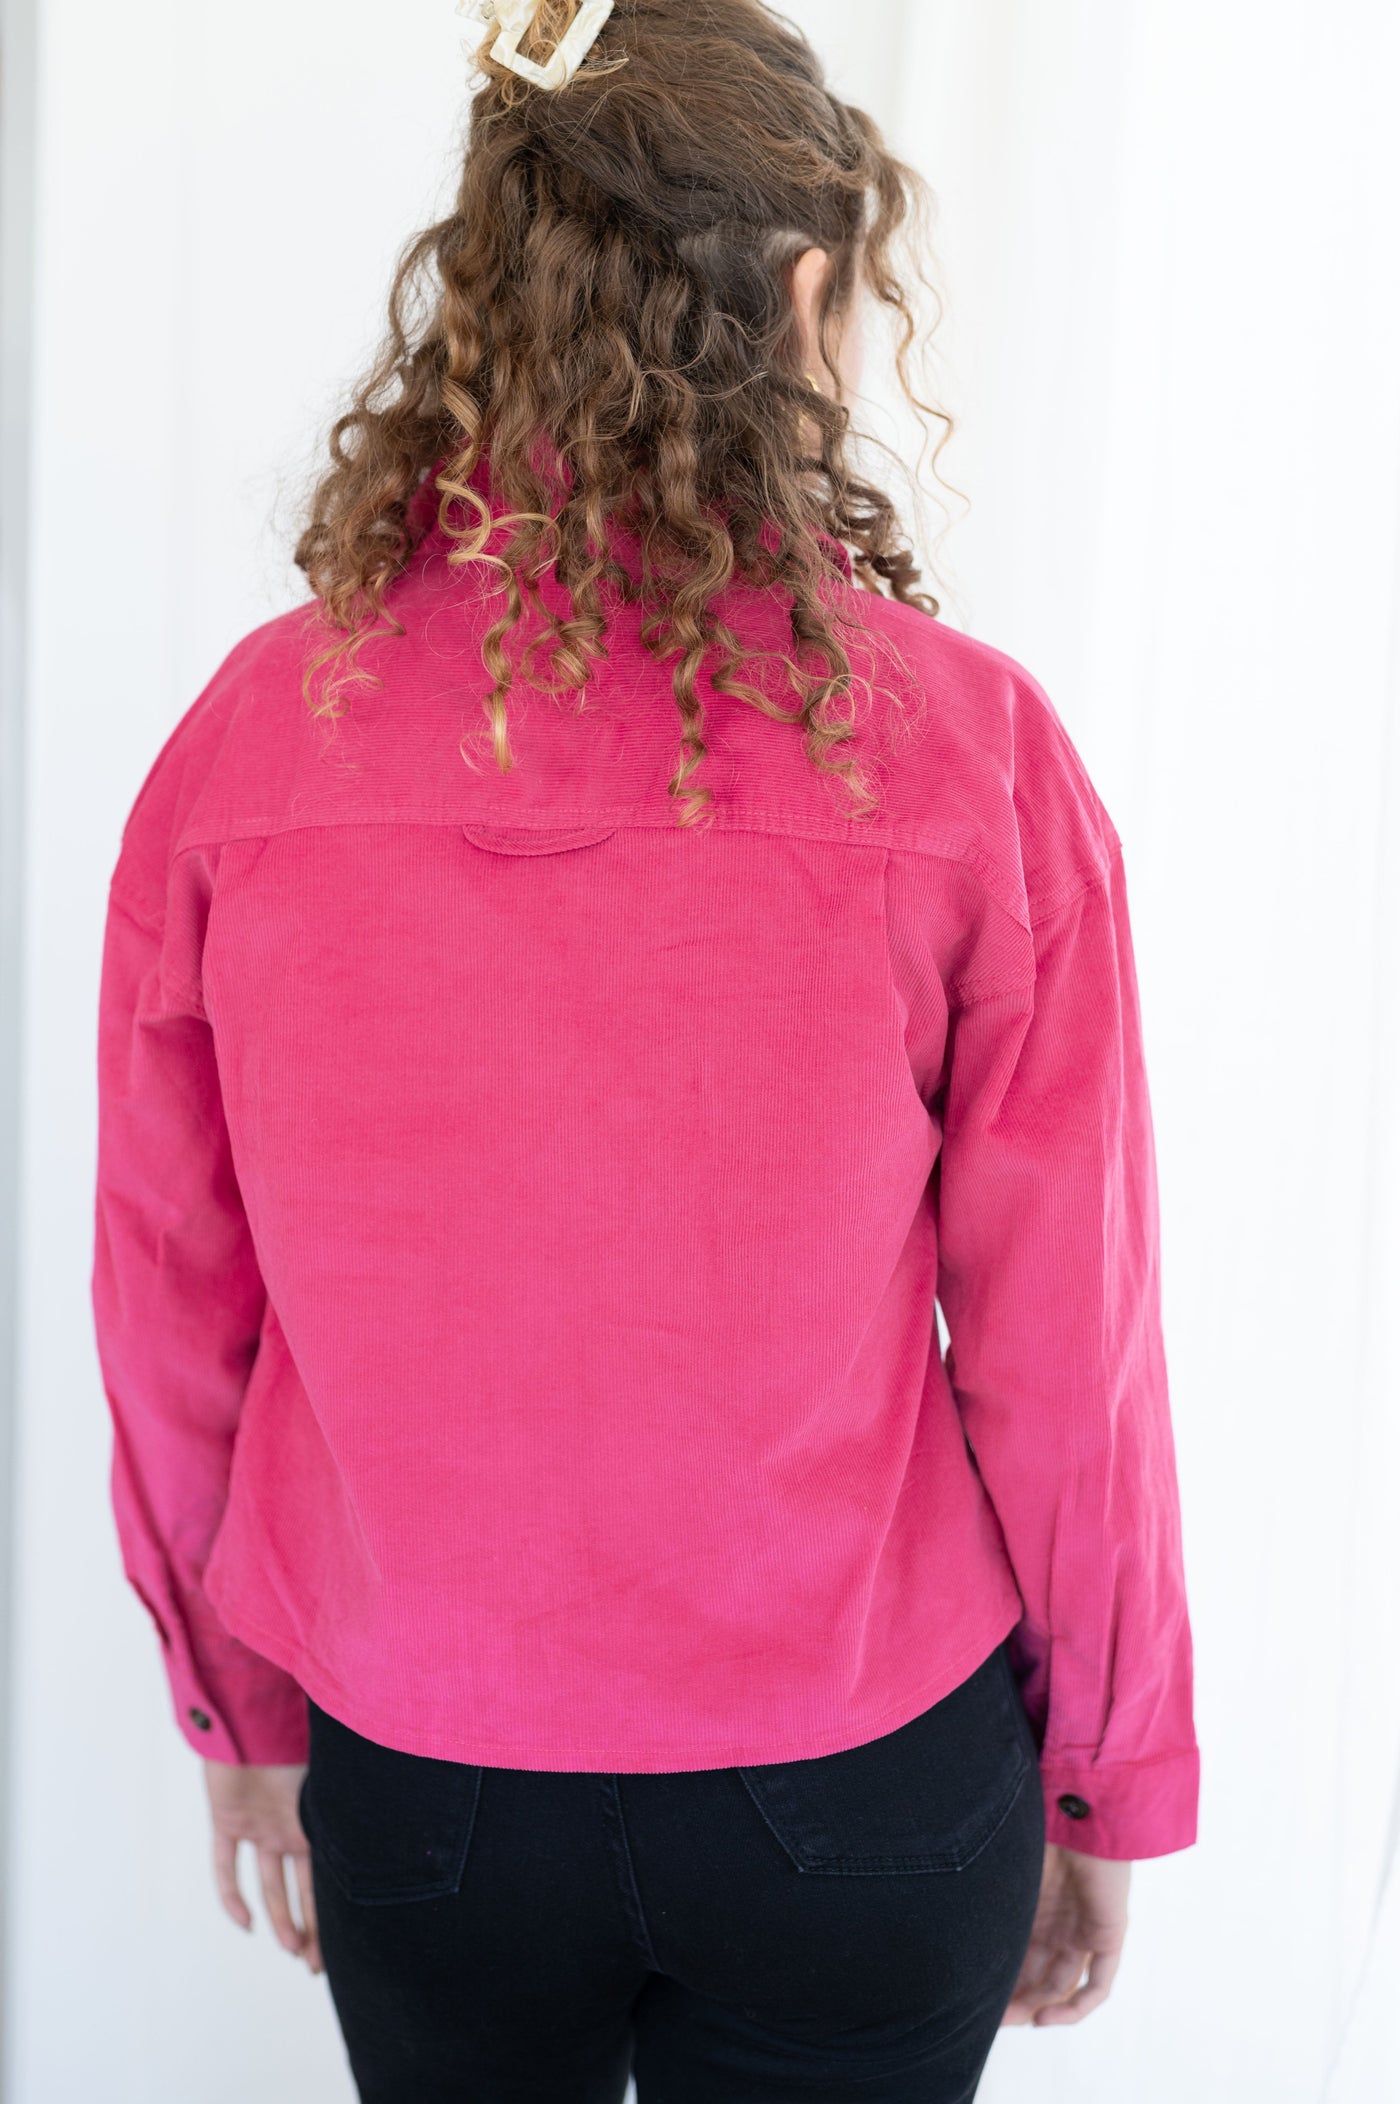 This Perfect Pop of Pink Jacket is the perfect way to update your look